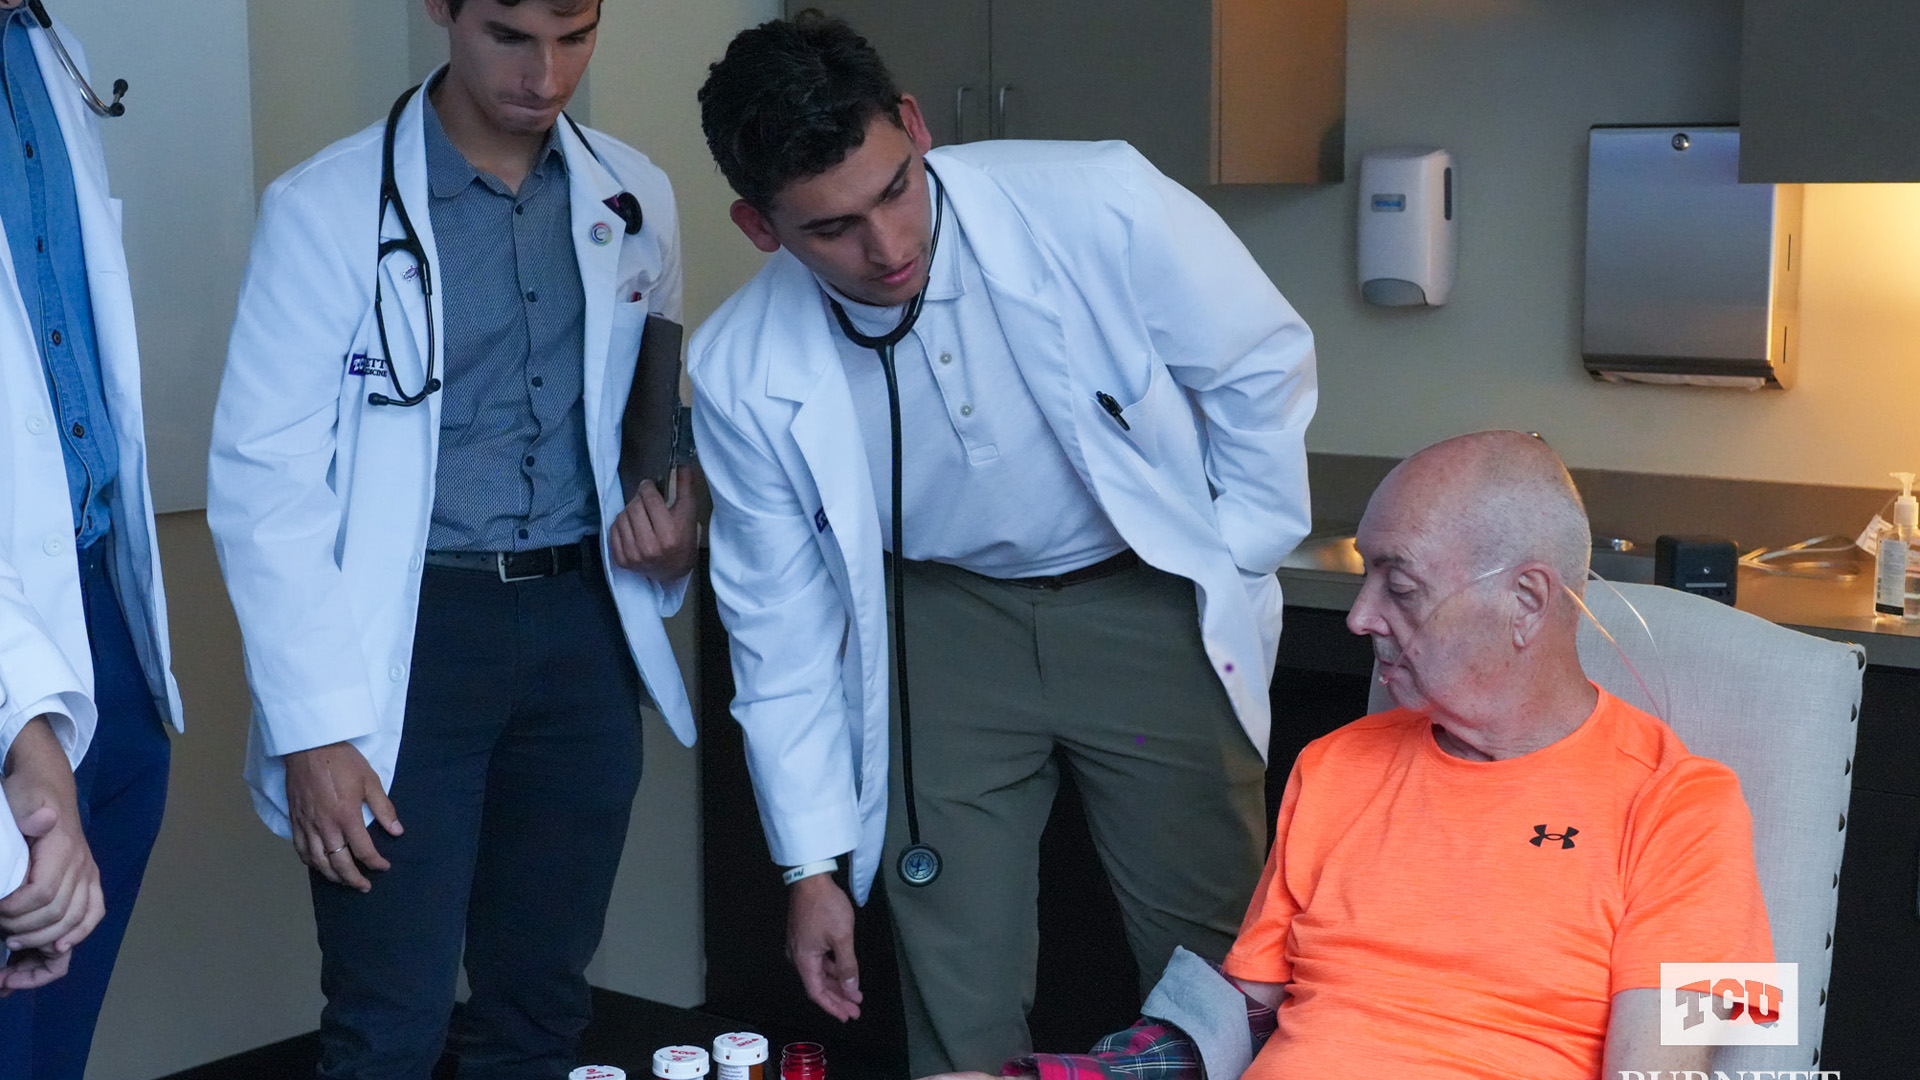 Nico Martinez, MS-1, speaks to a Standardized Patient during the Geriatric Escape Room exercise at the Anne Burnett Marion School of Medicine at Texas Christian University in Fort Worth, Texas.